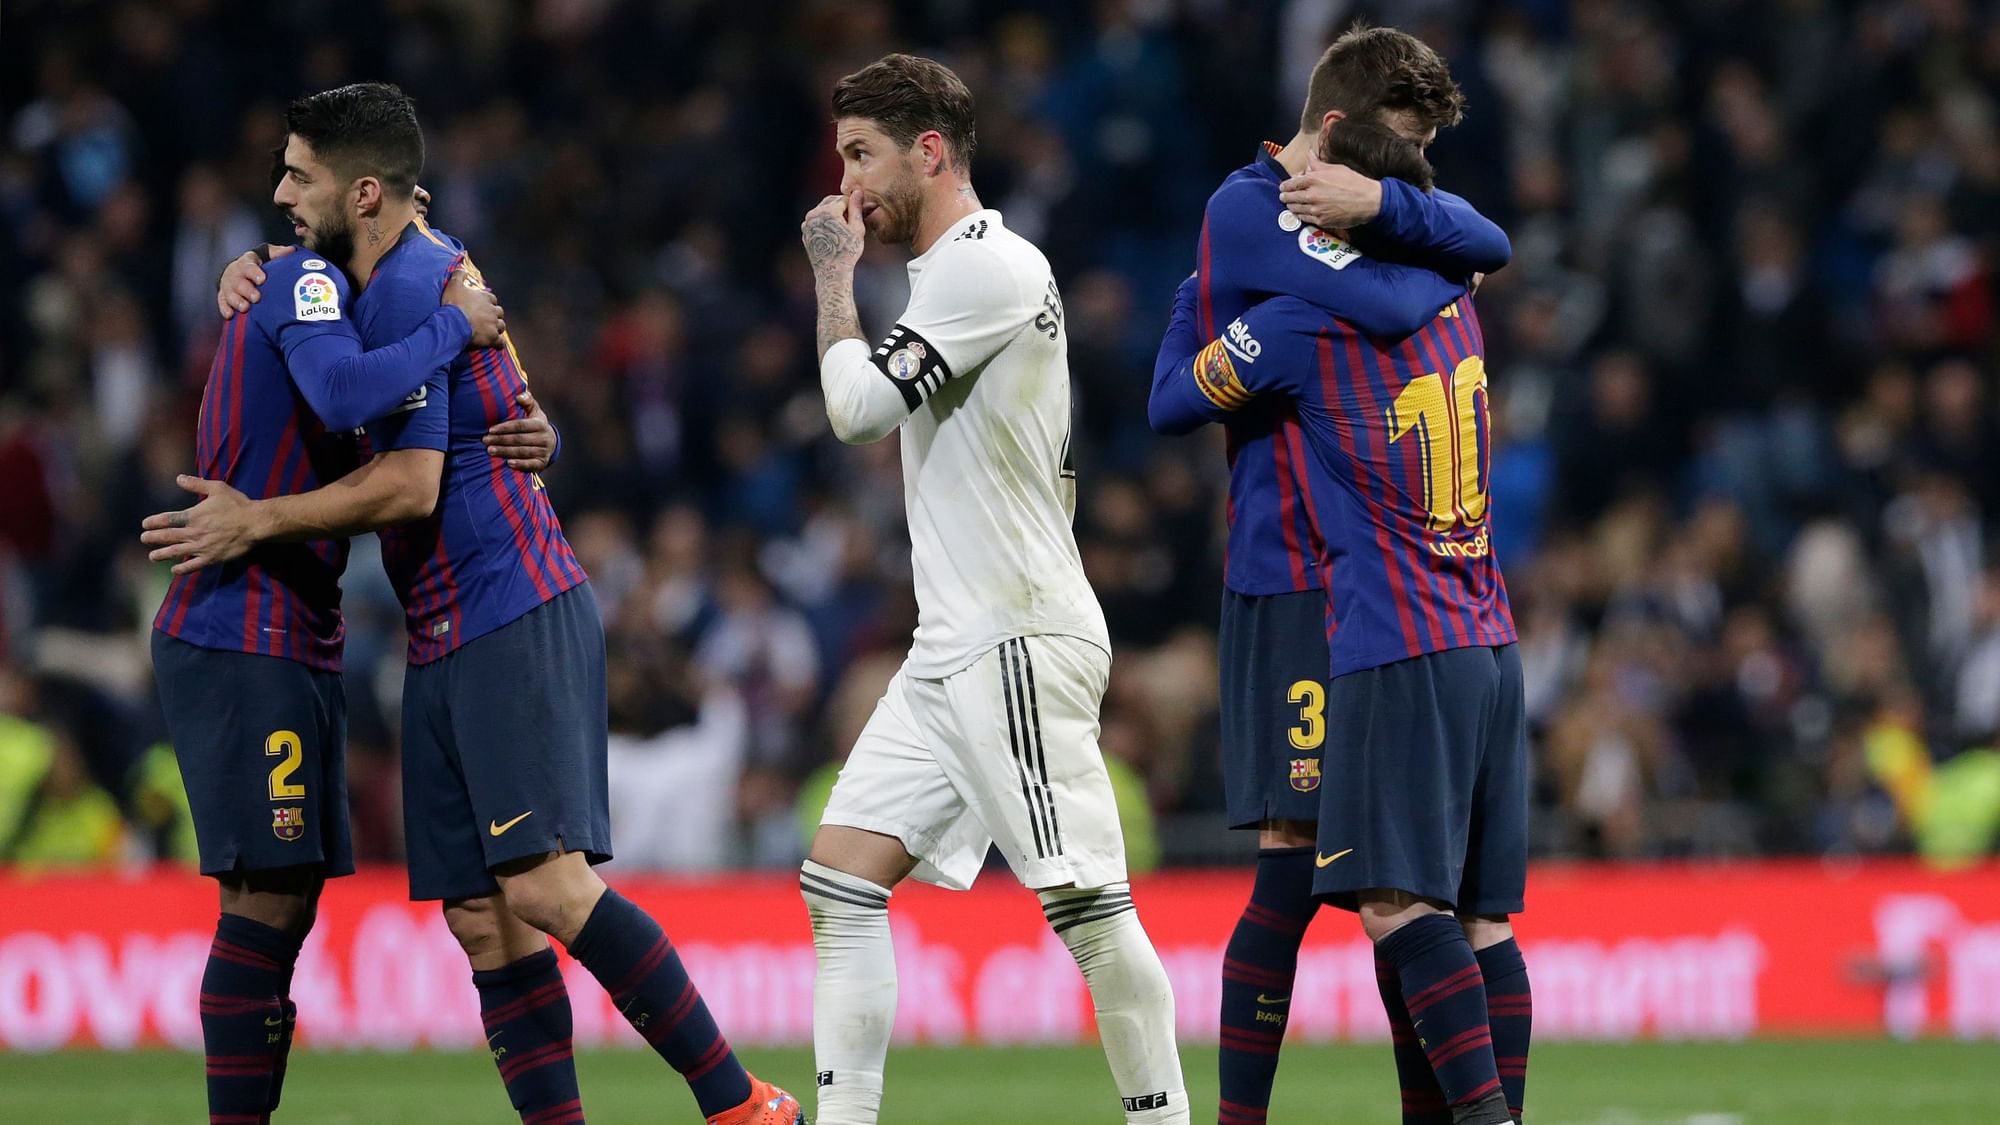 Real Madrid’s Sergio Ramos walks past Barcelona players celebrating after winning the La Liga match between Real Madrid and FC Barcelona at the Bernabeu stadium in Madrid on Saturday.